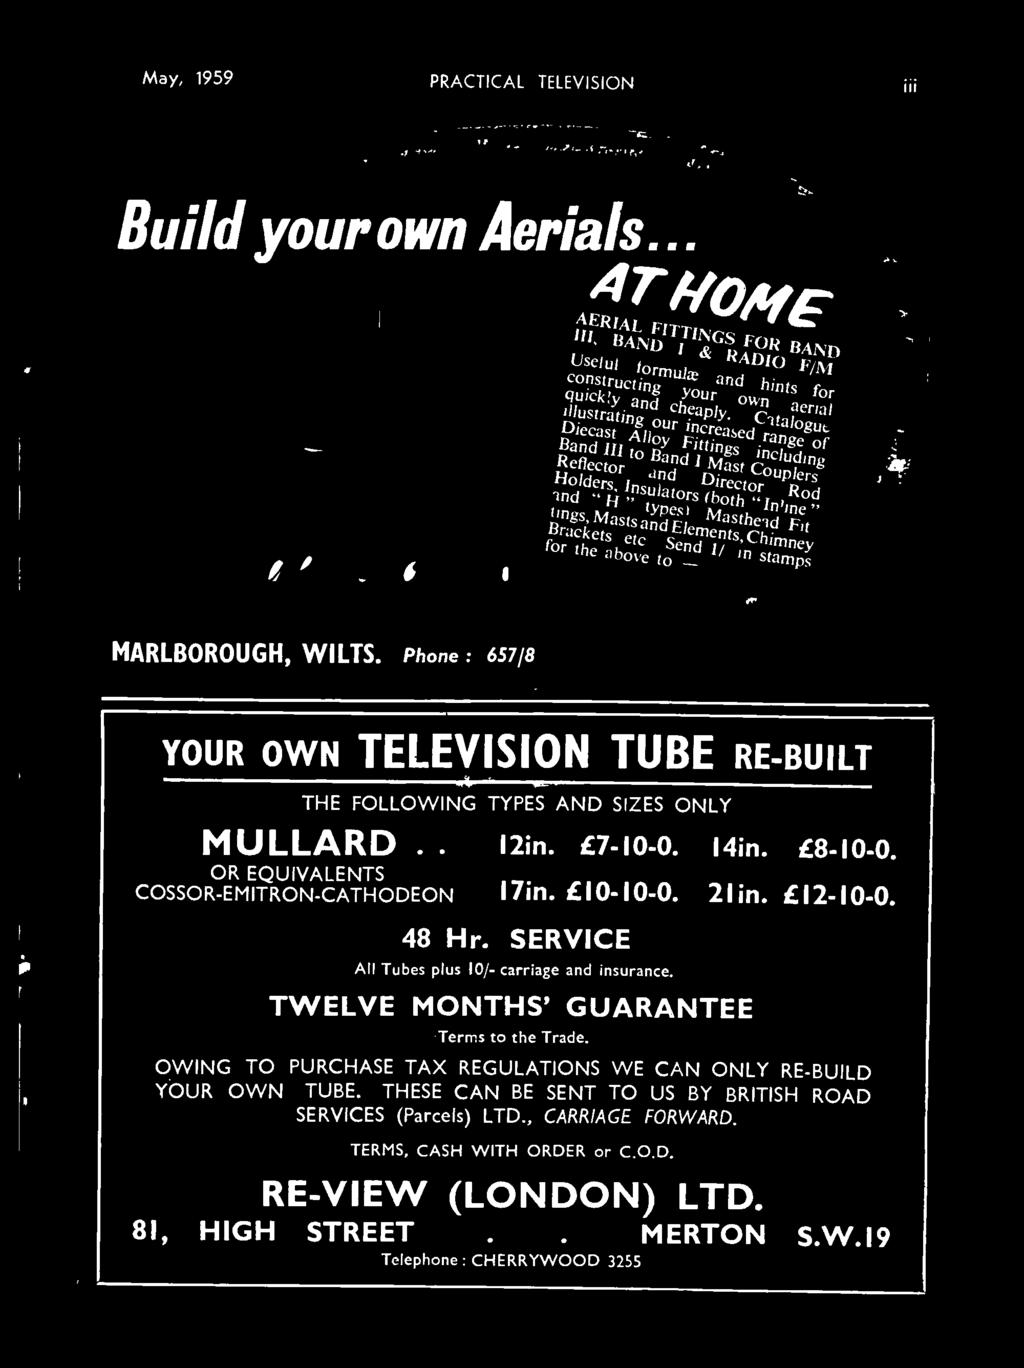 Phone : 657/8 kowl' YOUR OWN TELEVISION TUBE RE -BUILT THE FOLLOWING TYPES AND SIZES ONLY MULLARD.. OR EQUIVALENTS COSSOR- EMITRON- CATHODEON I 2in. 7-10-0. 14in. 8-10-0. I 7in.